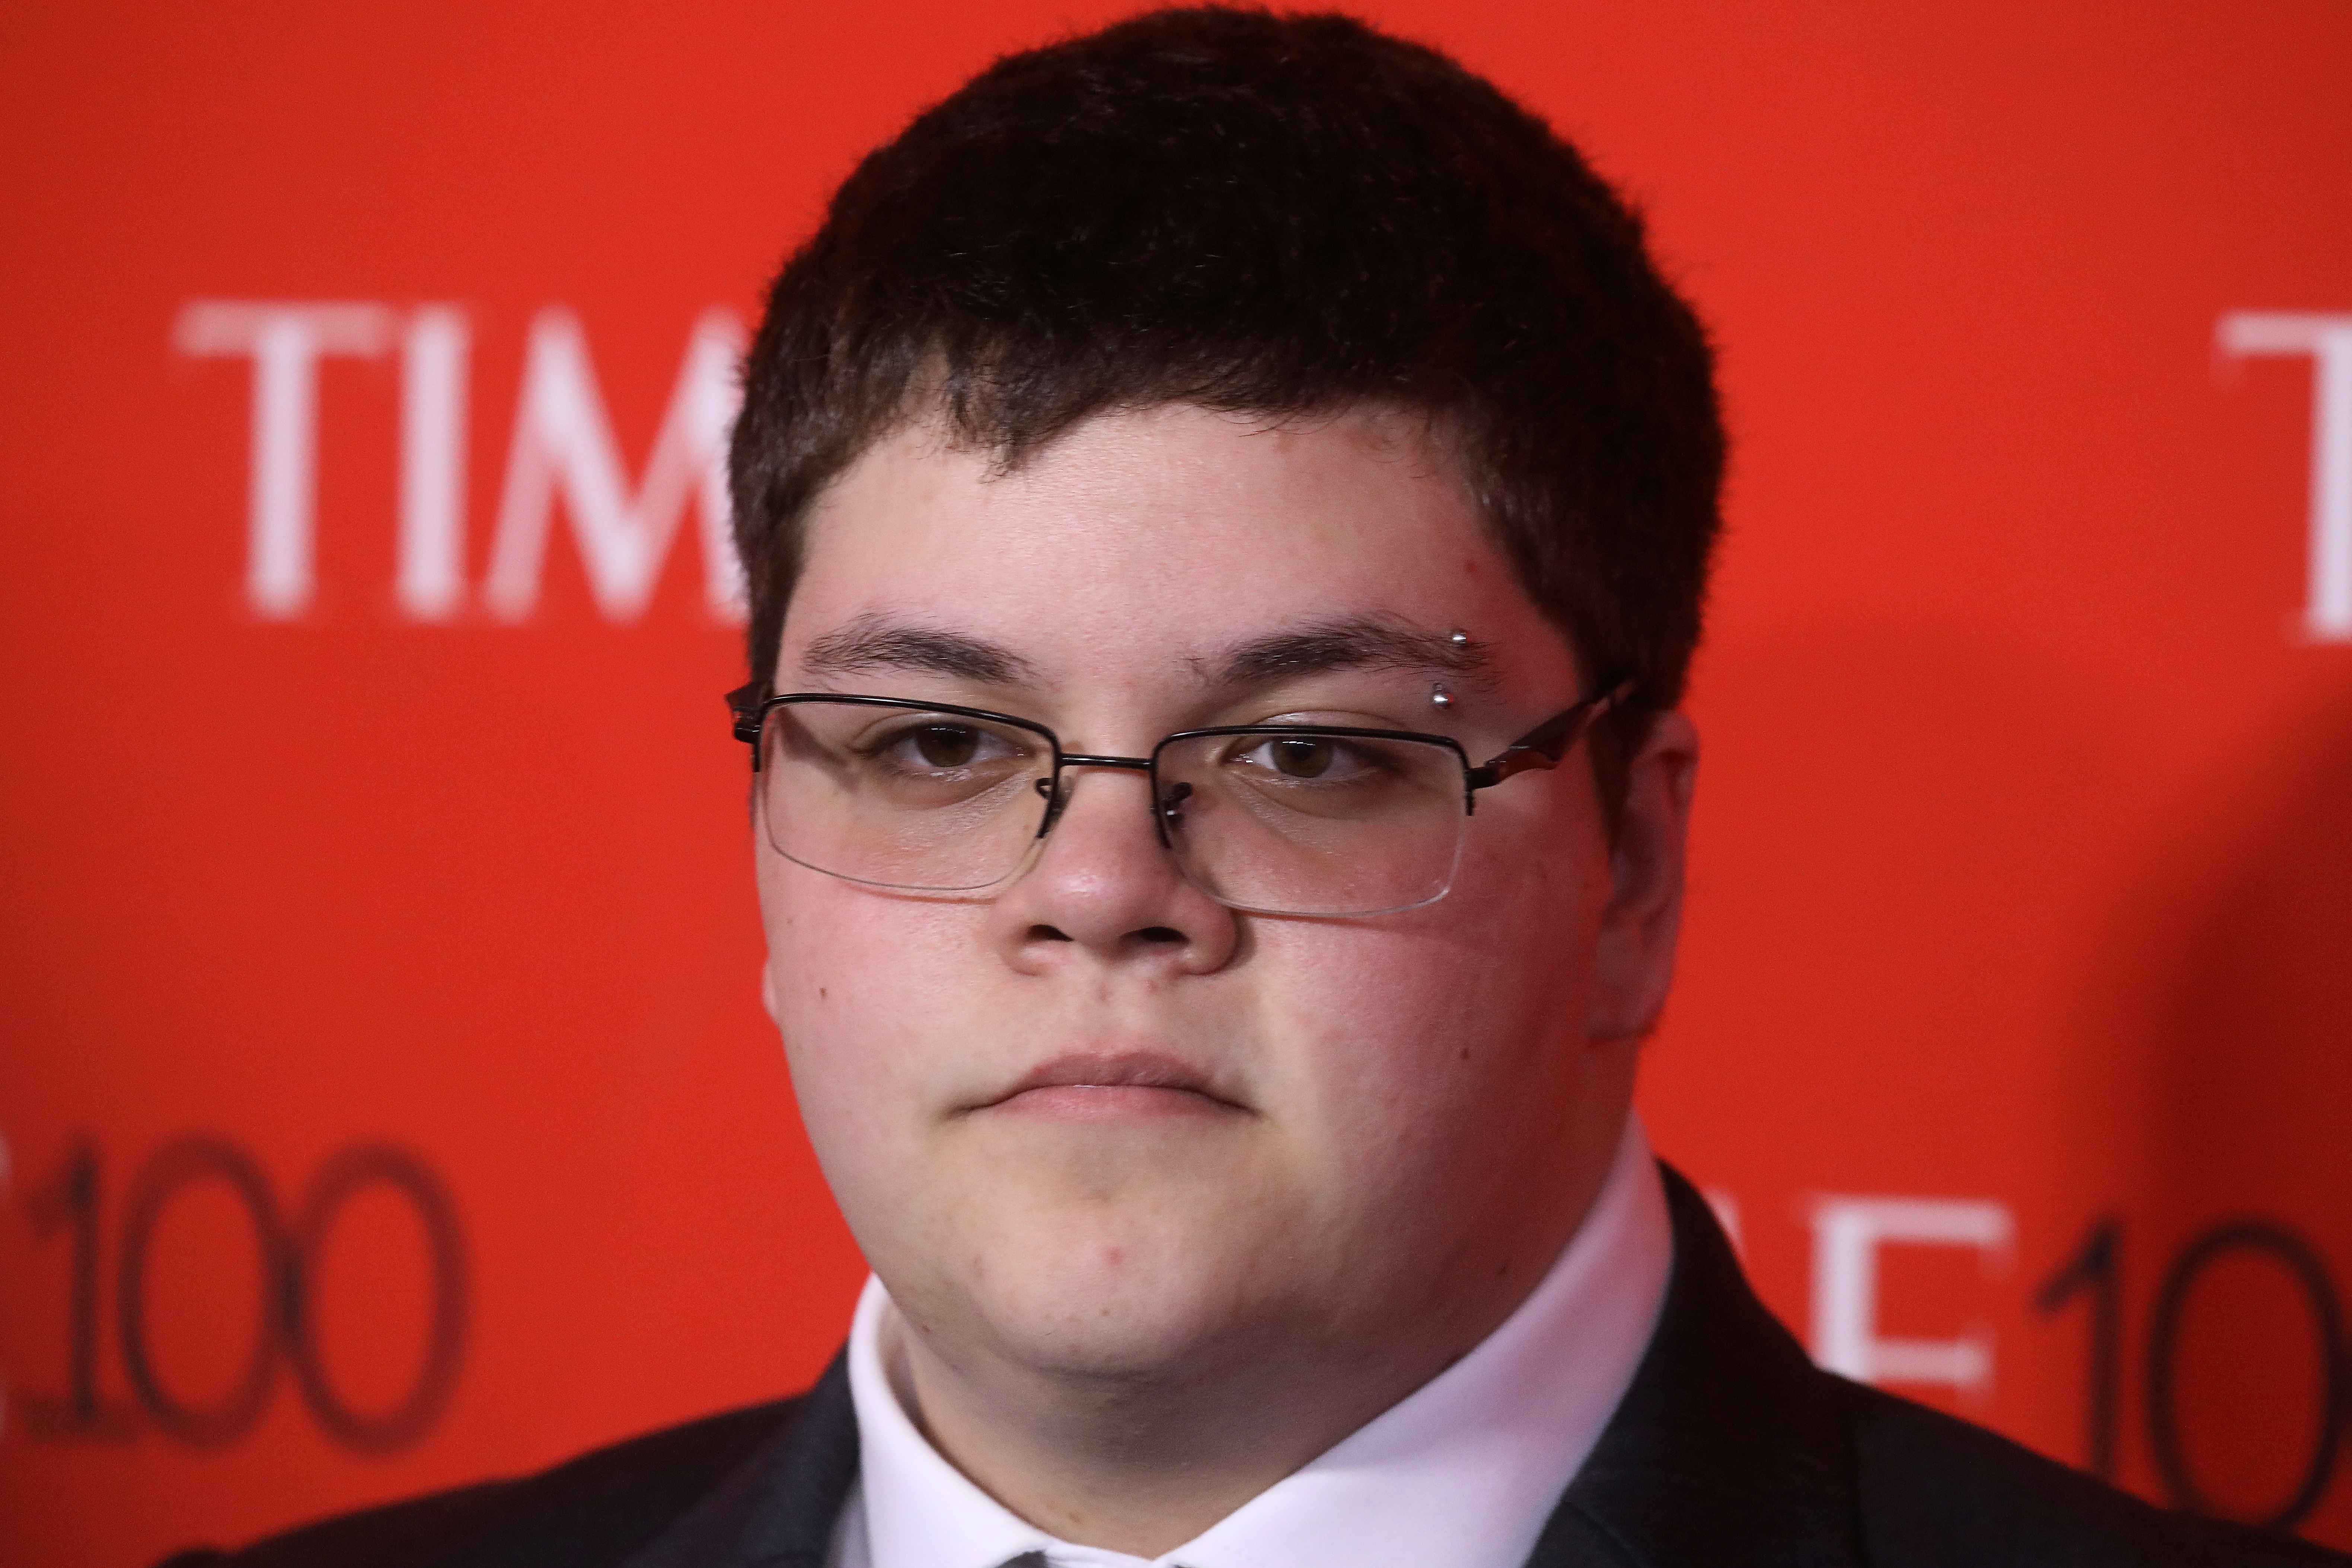 Activist Gavin Grimm arrives for the Time 100 Gala in the Manhattan borough of New York, New York, April 25, 2017. REUTERS/Carlo Allegri